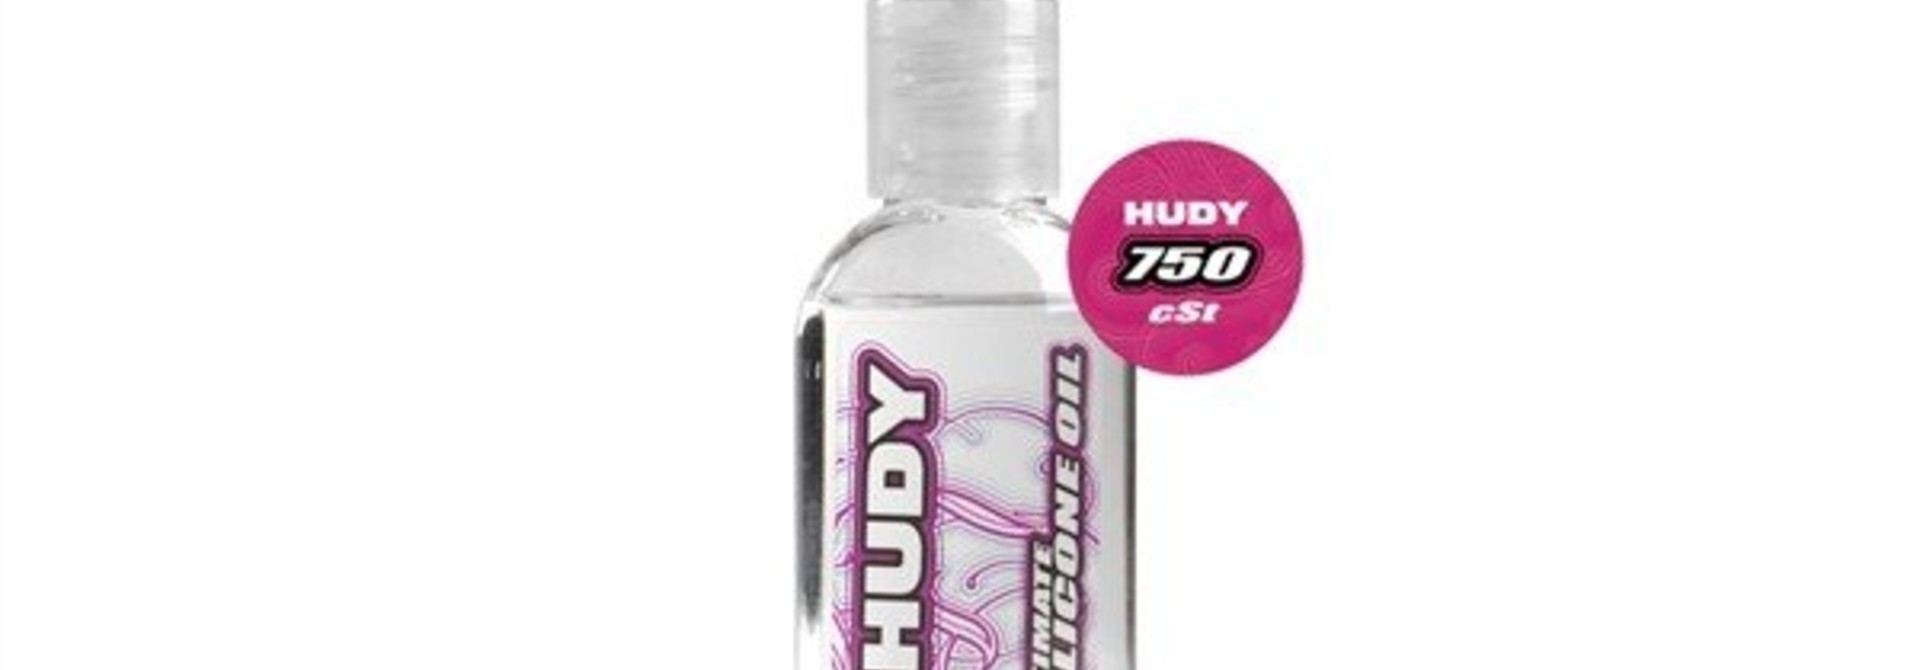 HUDY ULTIMATE SILICONE OIL 750 cSt - 50ML. H106375